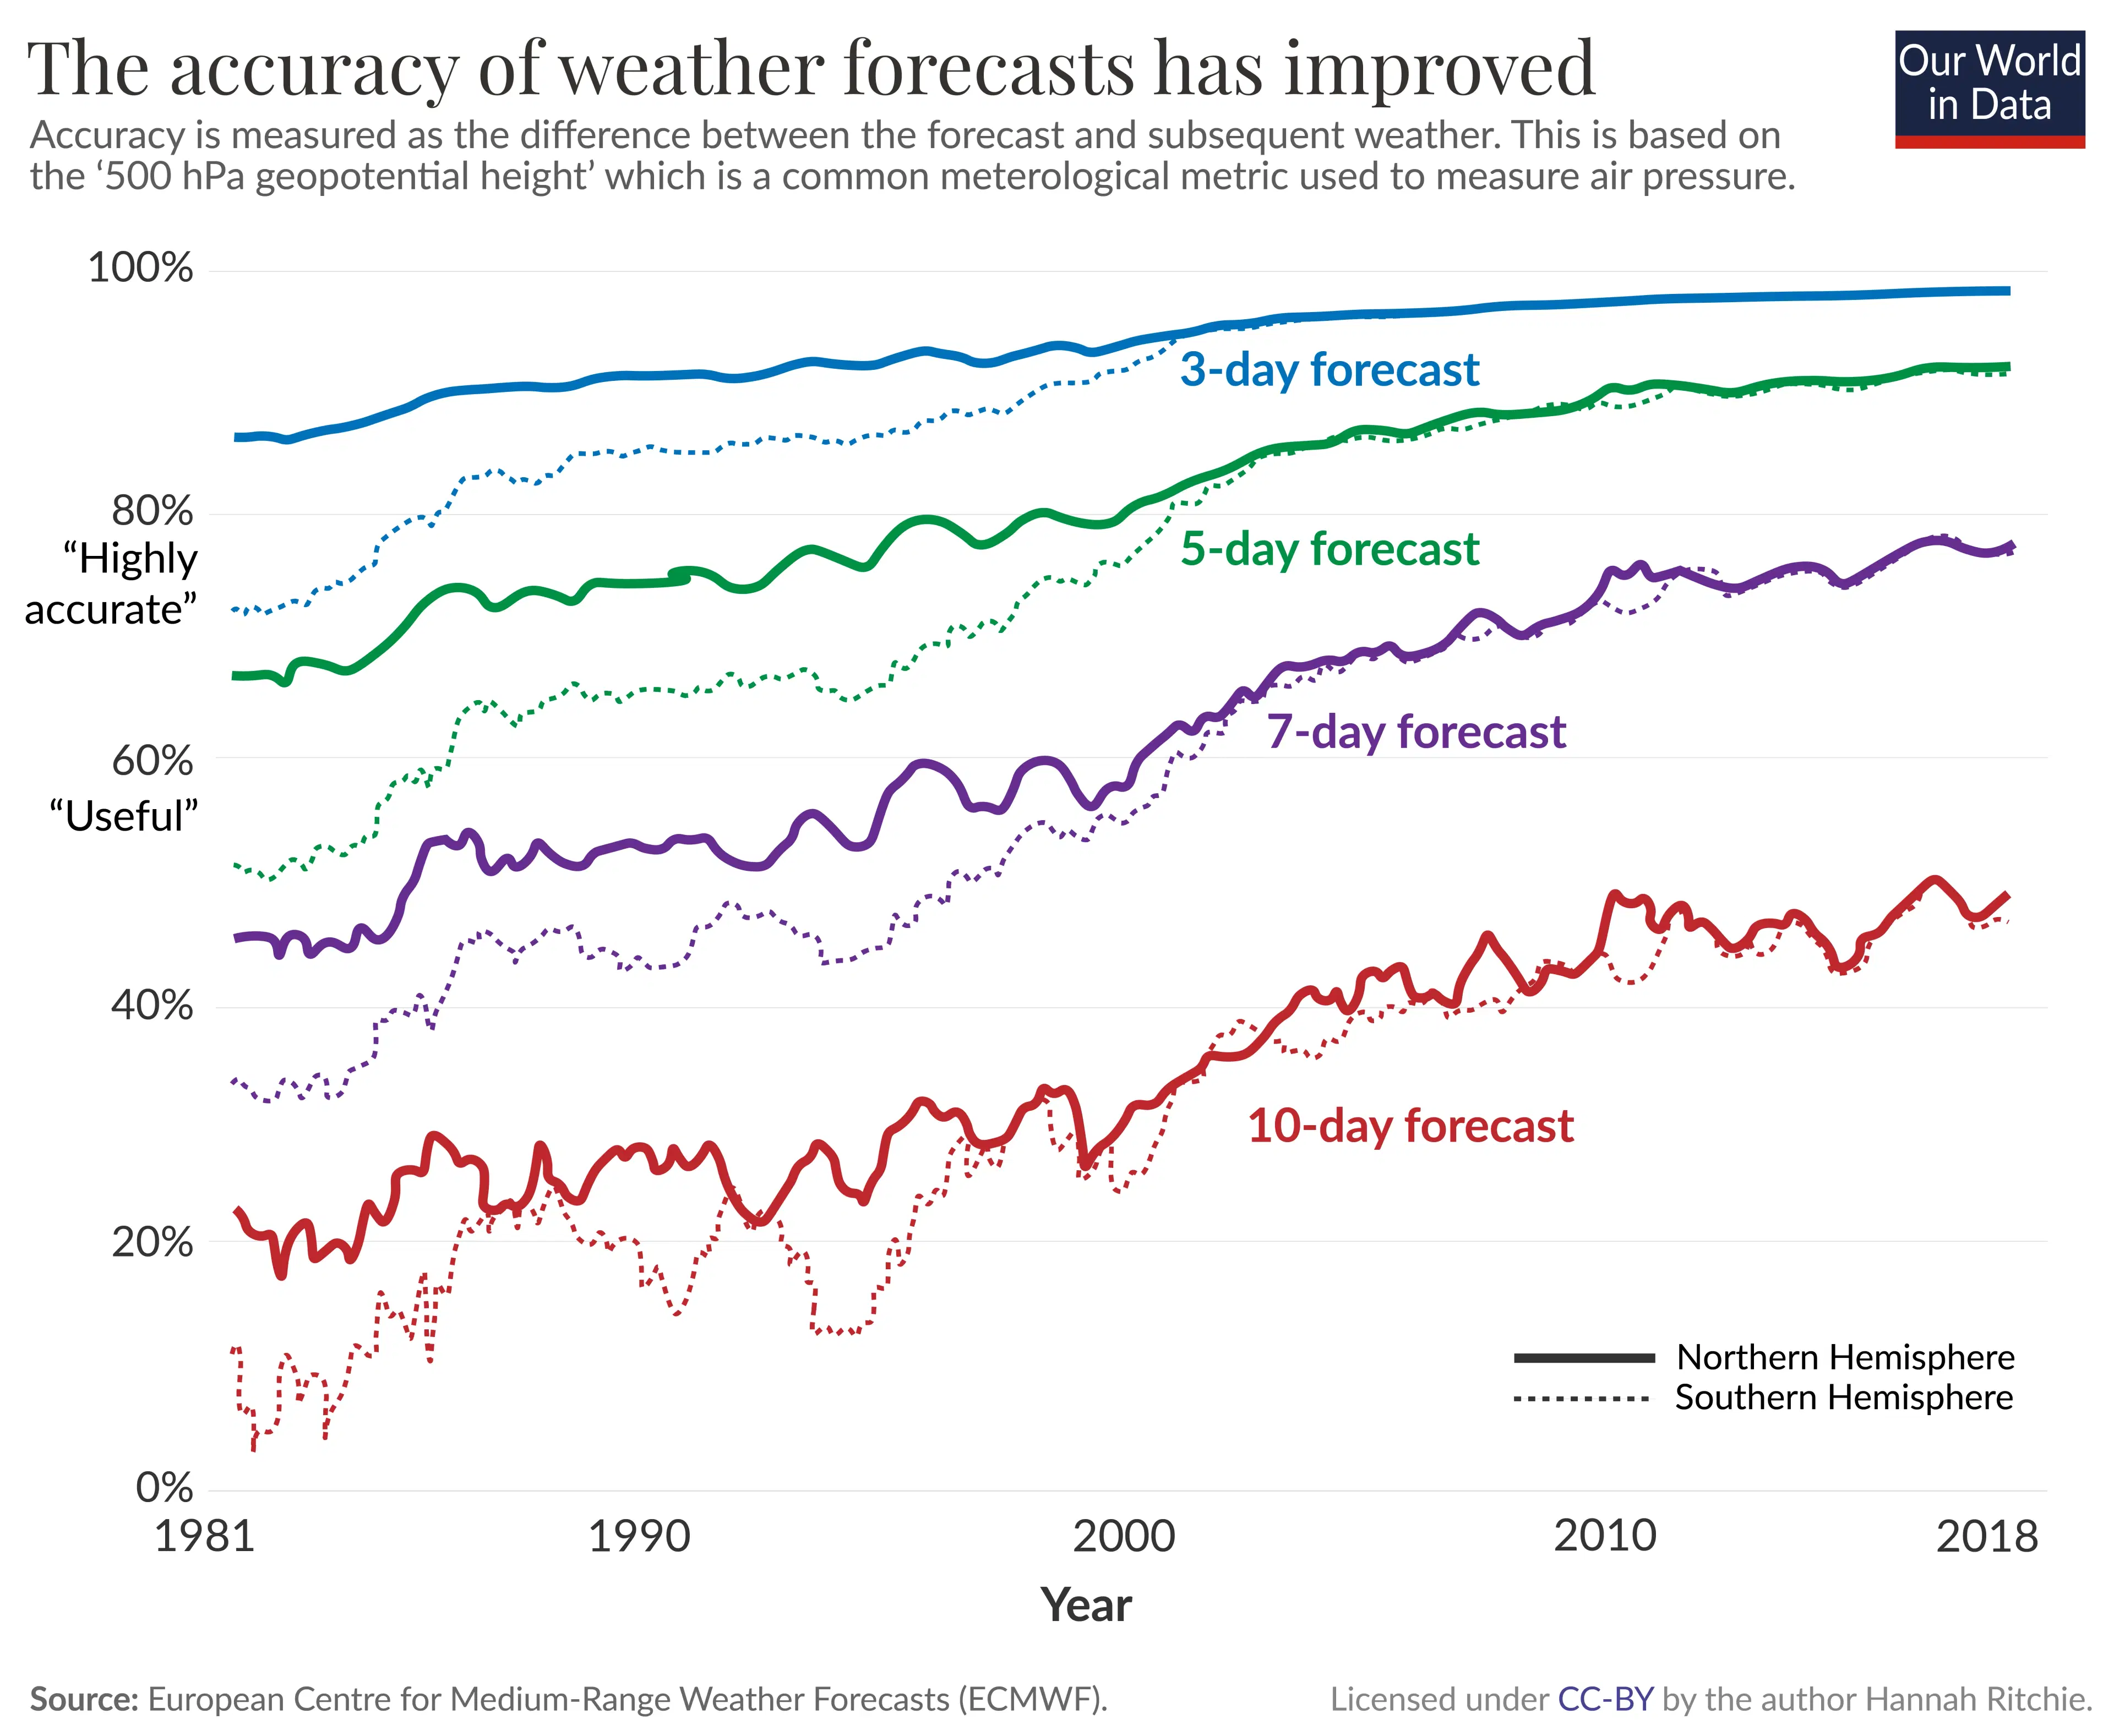 The Rising Accuracy of Weather Forecasts